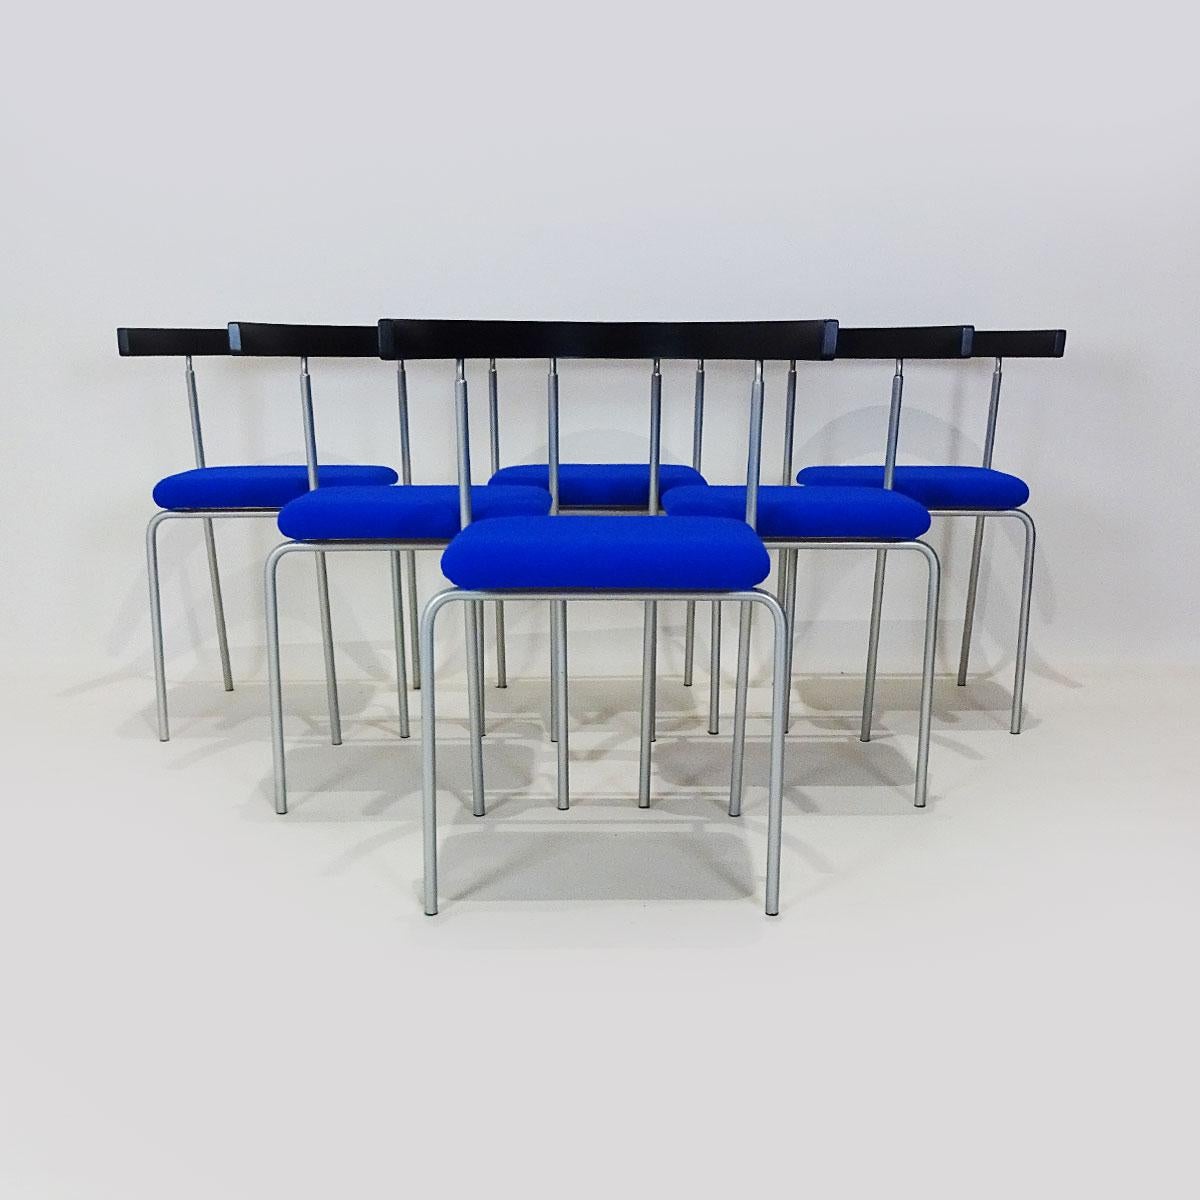 Compact Vintage Danish Bentwood Dining Set in Black, Metal and Electric Blue 2